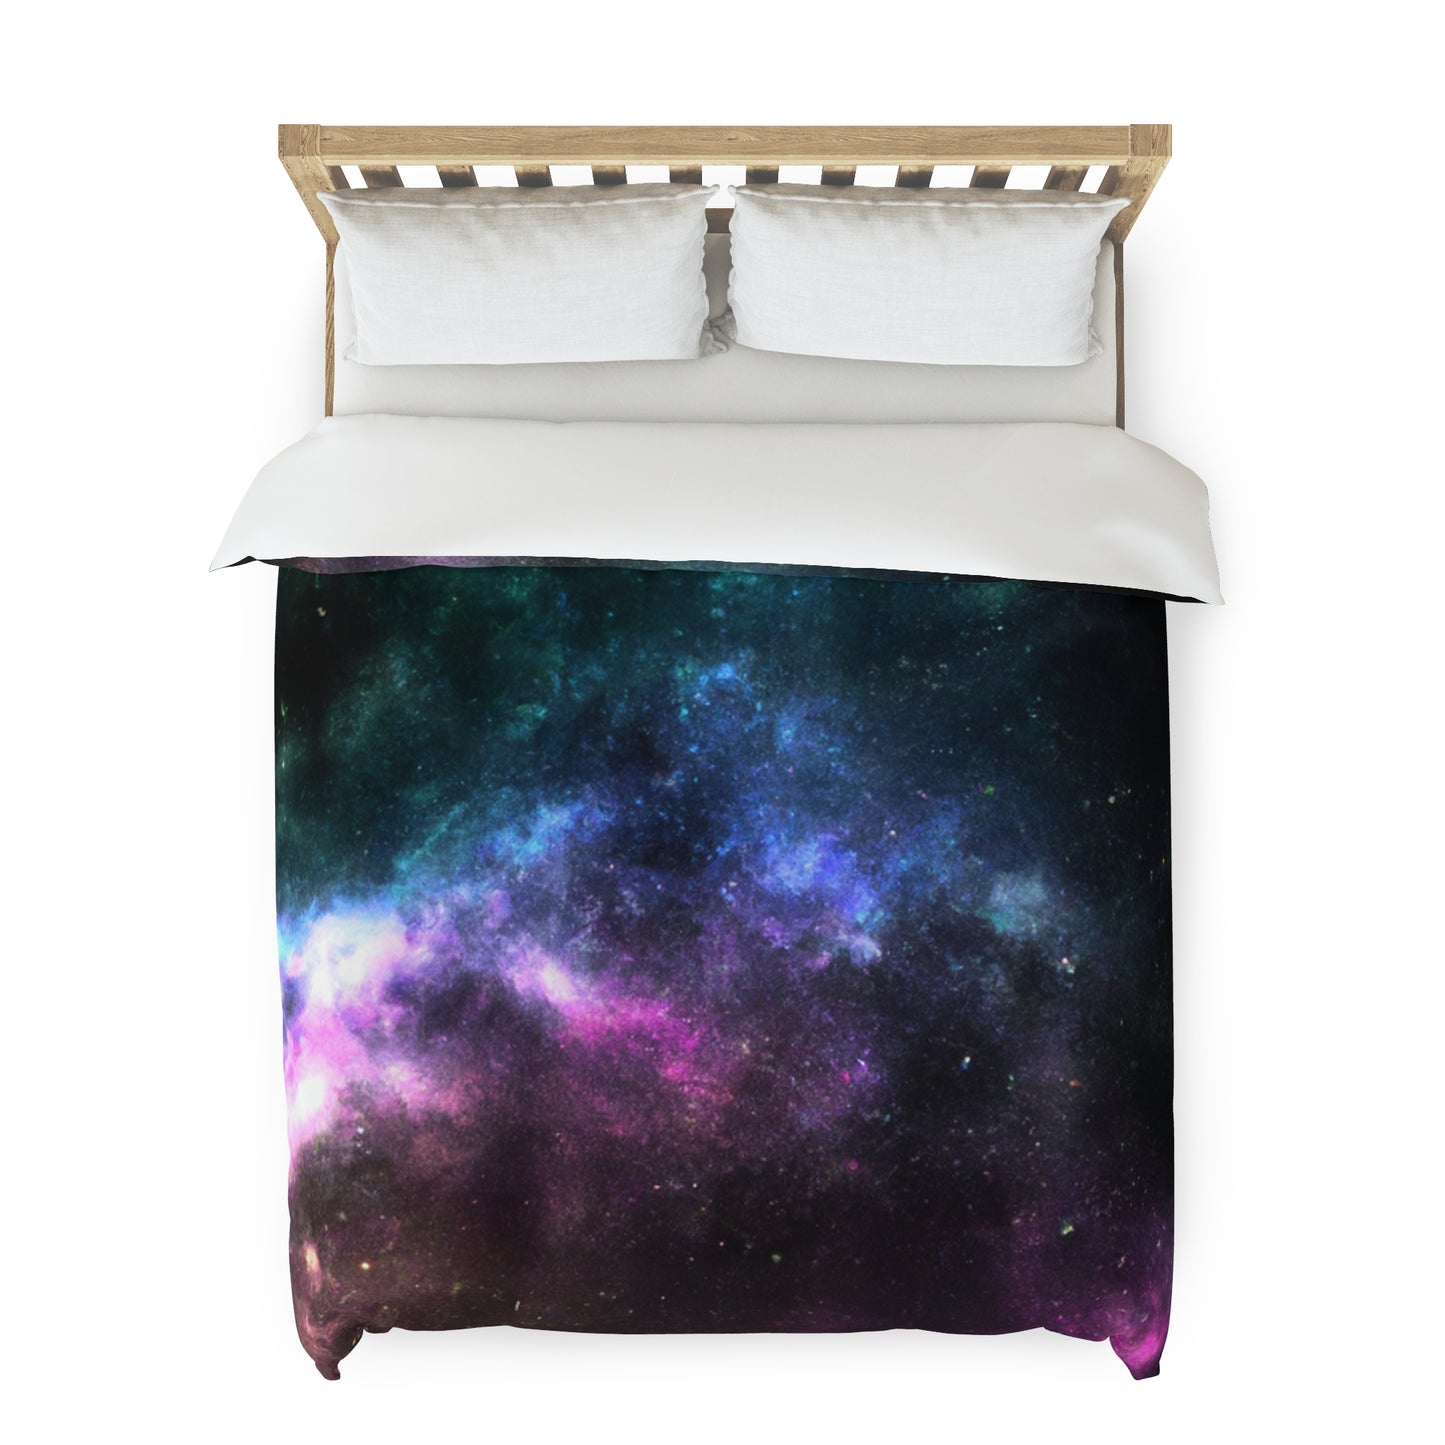 Dreamy Danse Macabre - Astronomy Duvet Bed Cover